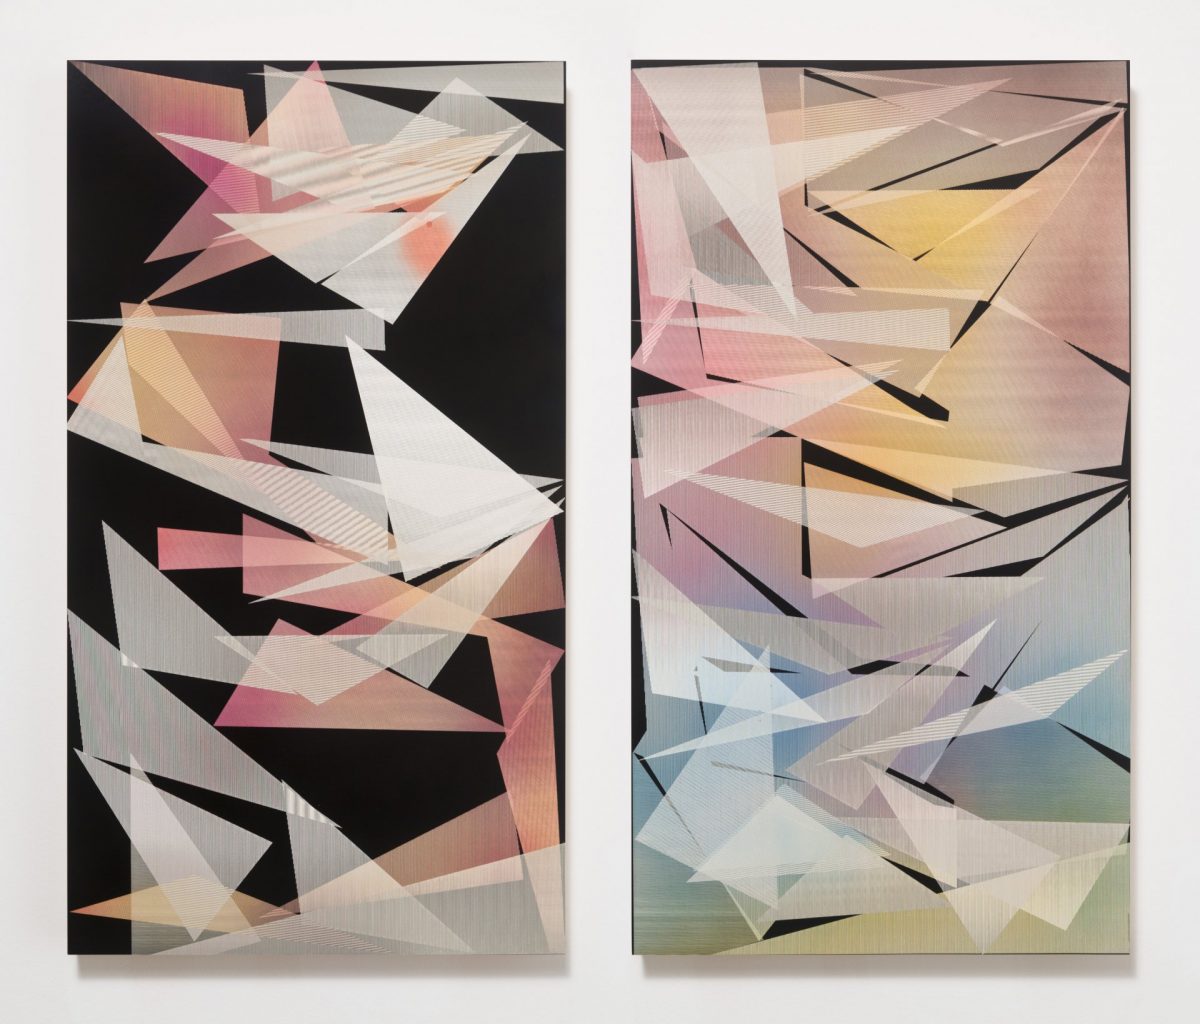 pae white, tissue diptych, 2014
carvings: clay and ink on wood, 81 x 45 cm (each)